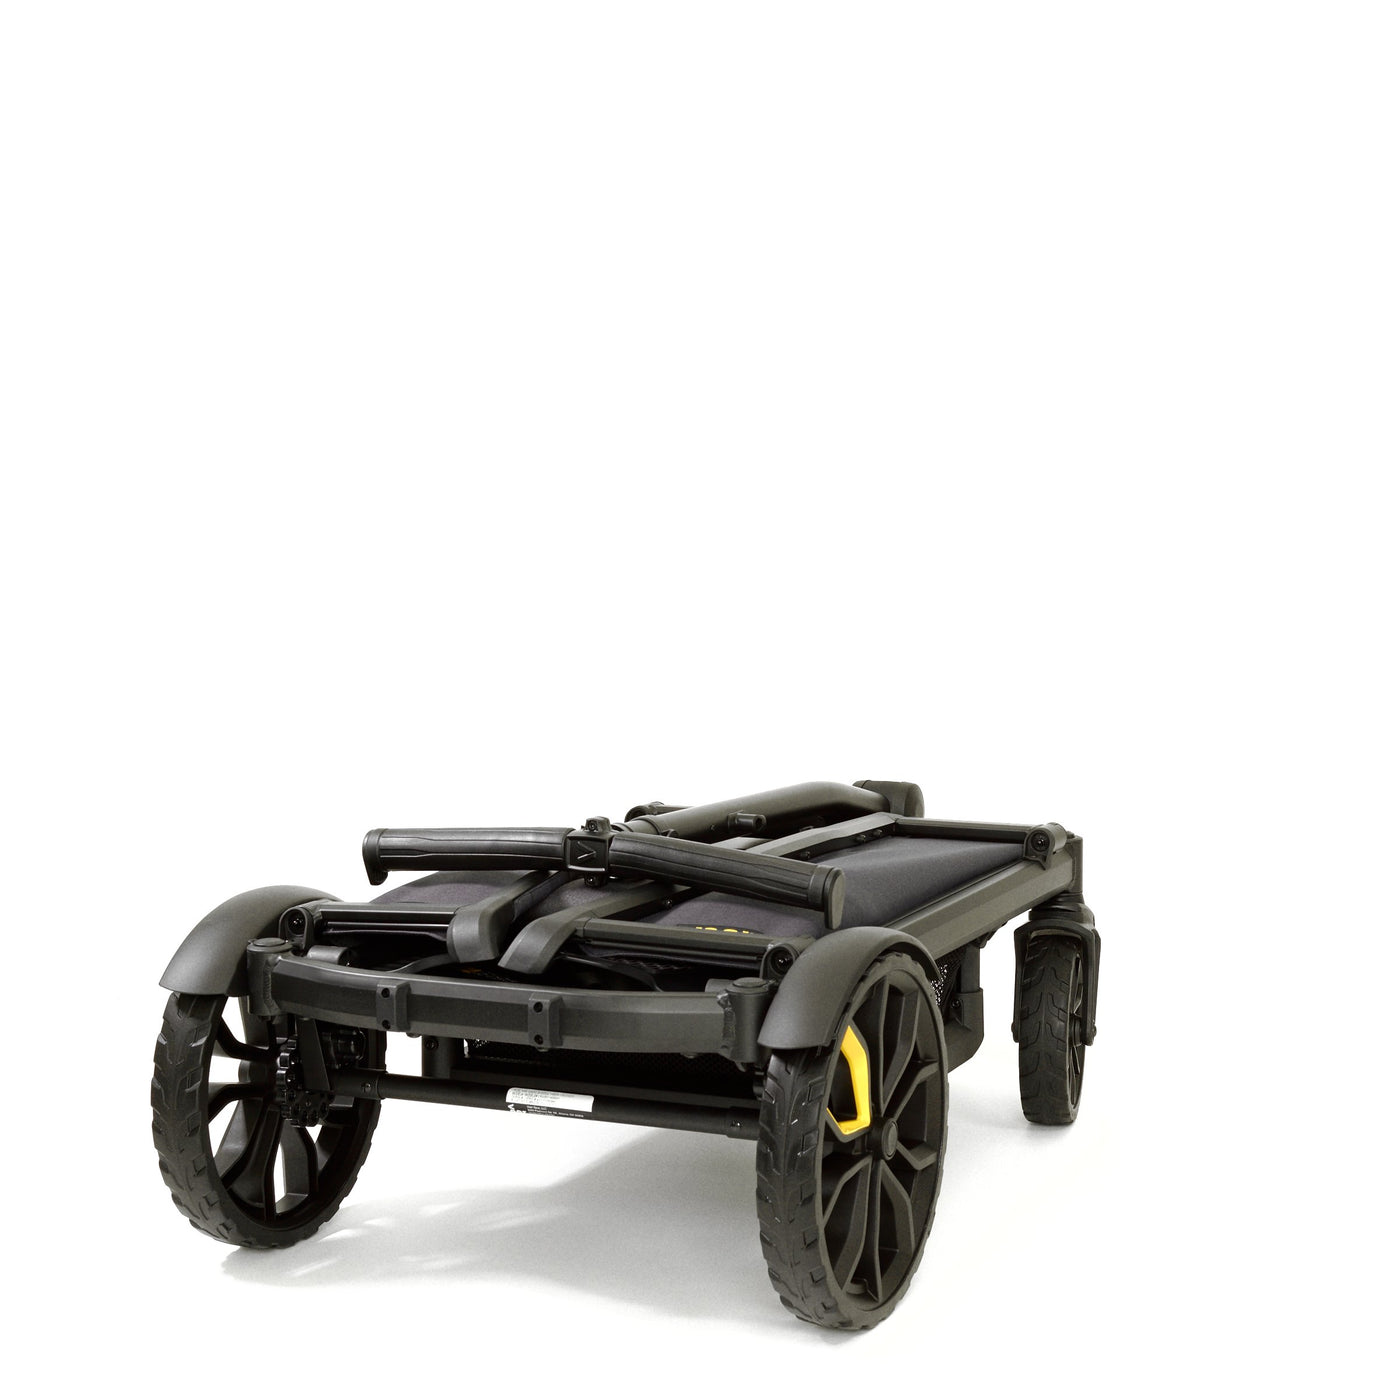 Veer Cruiser AllTerrain Wagon with Canopy and Sidewalls